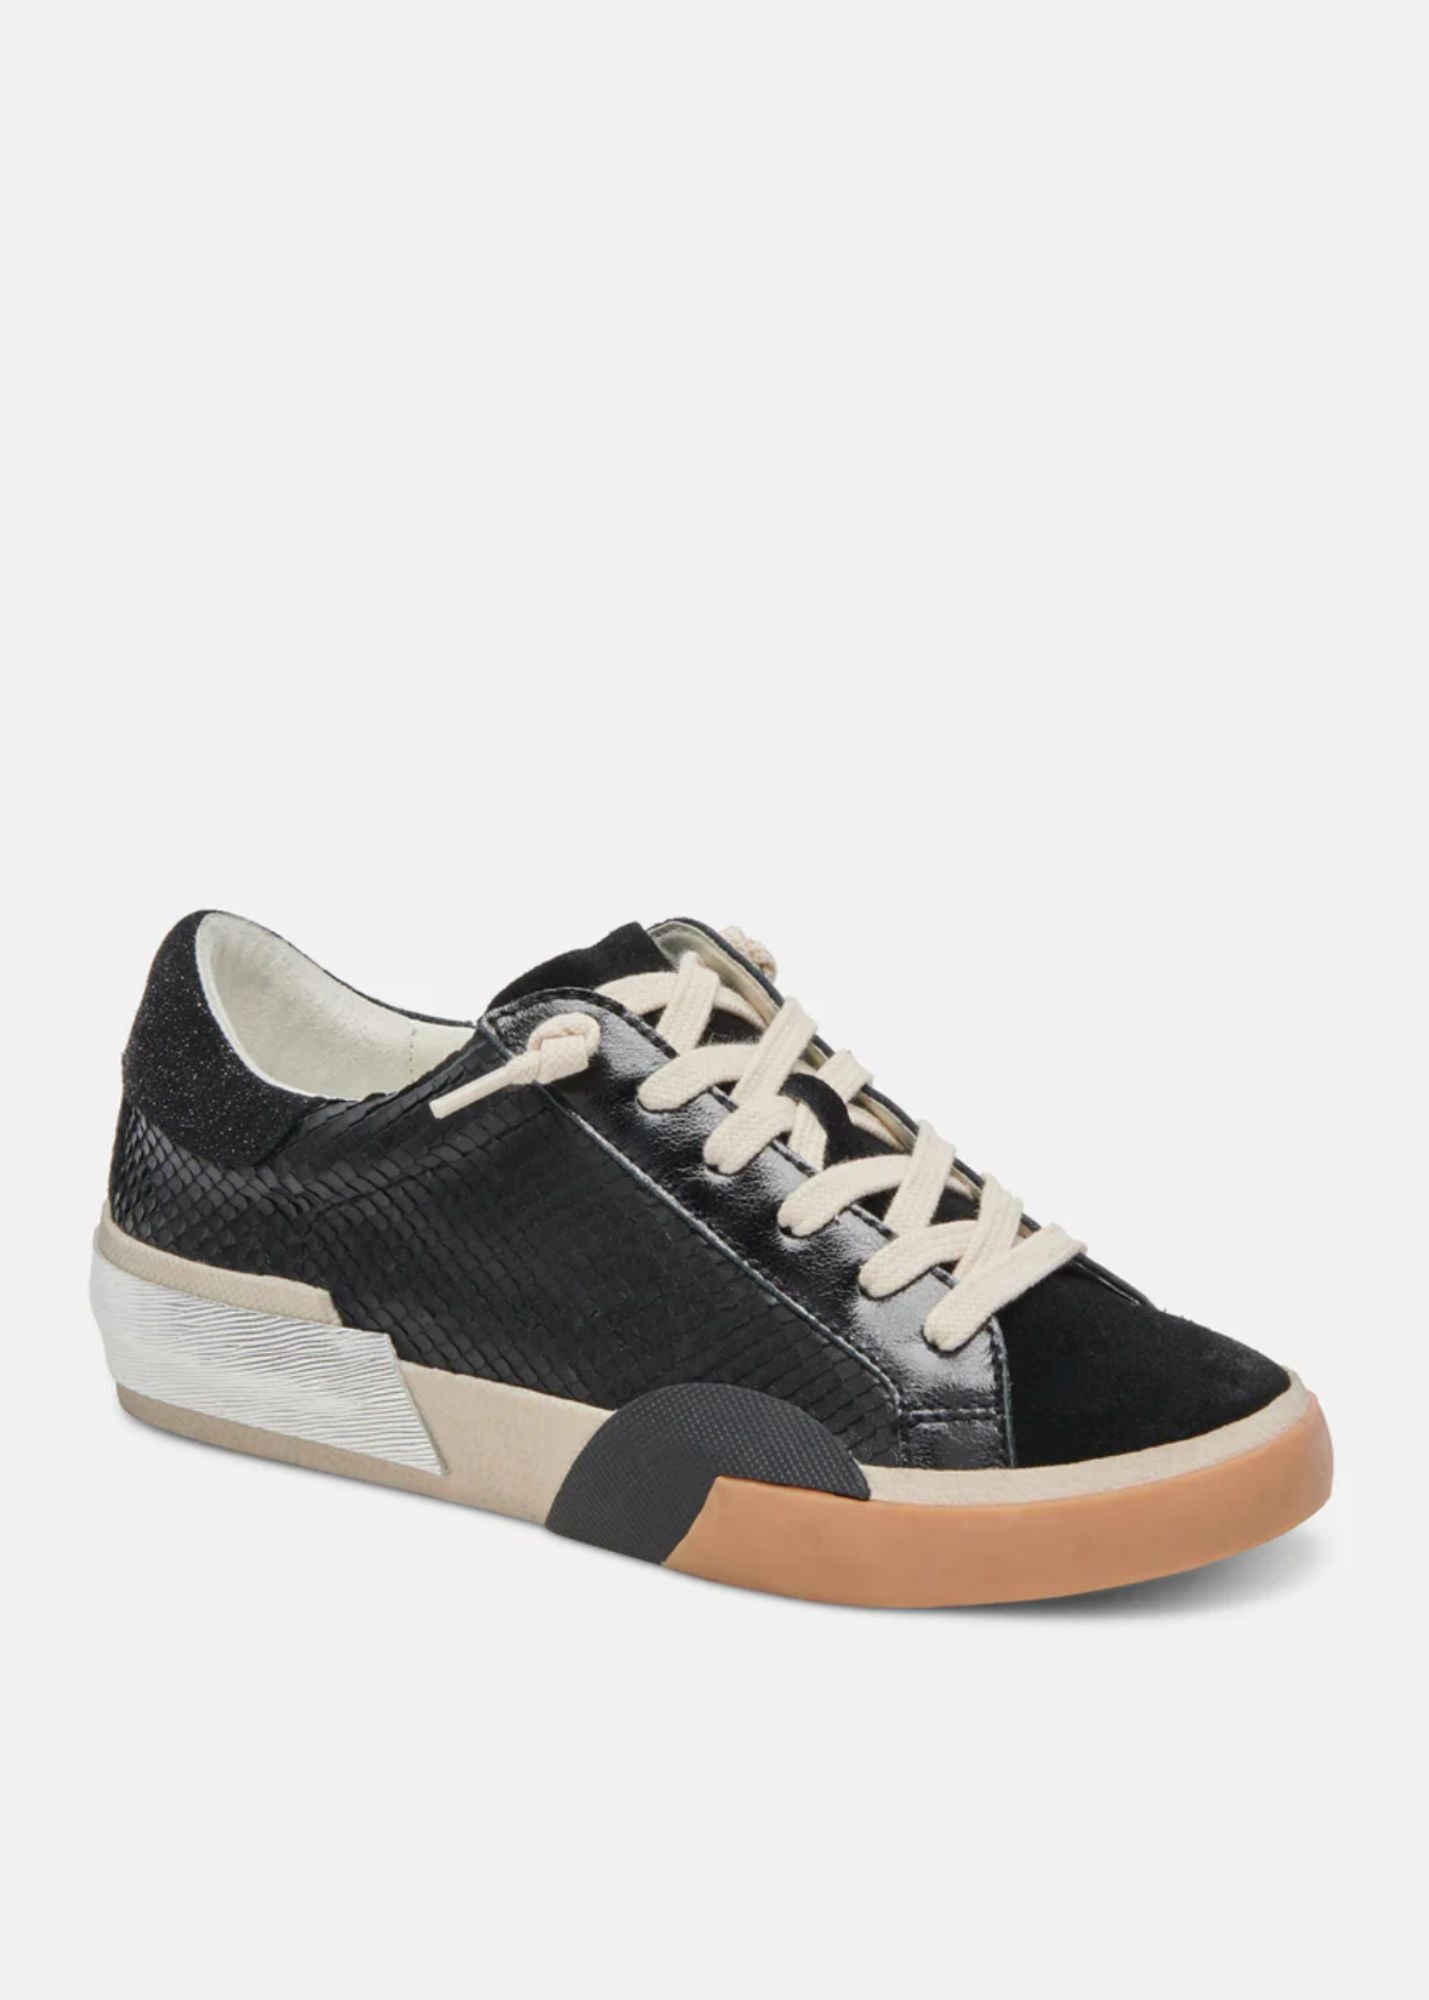 Zina Onyx Embossed Leather Sneaker Shoes